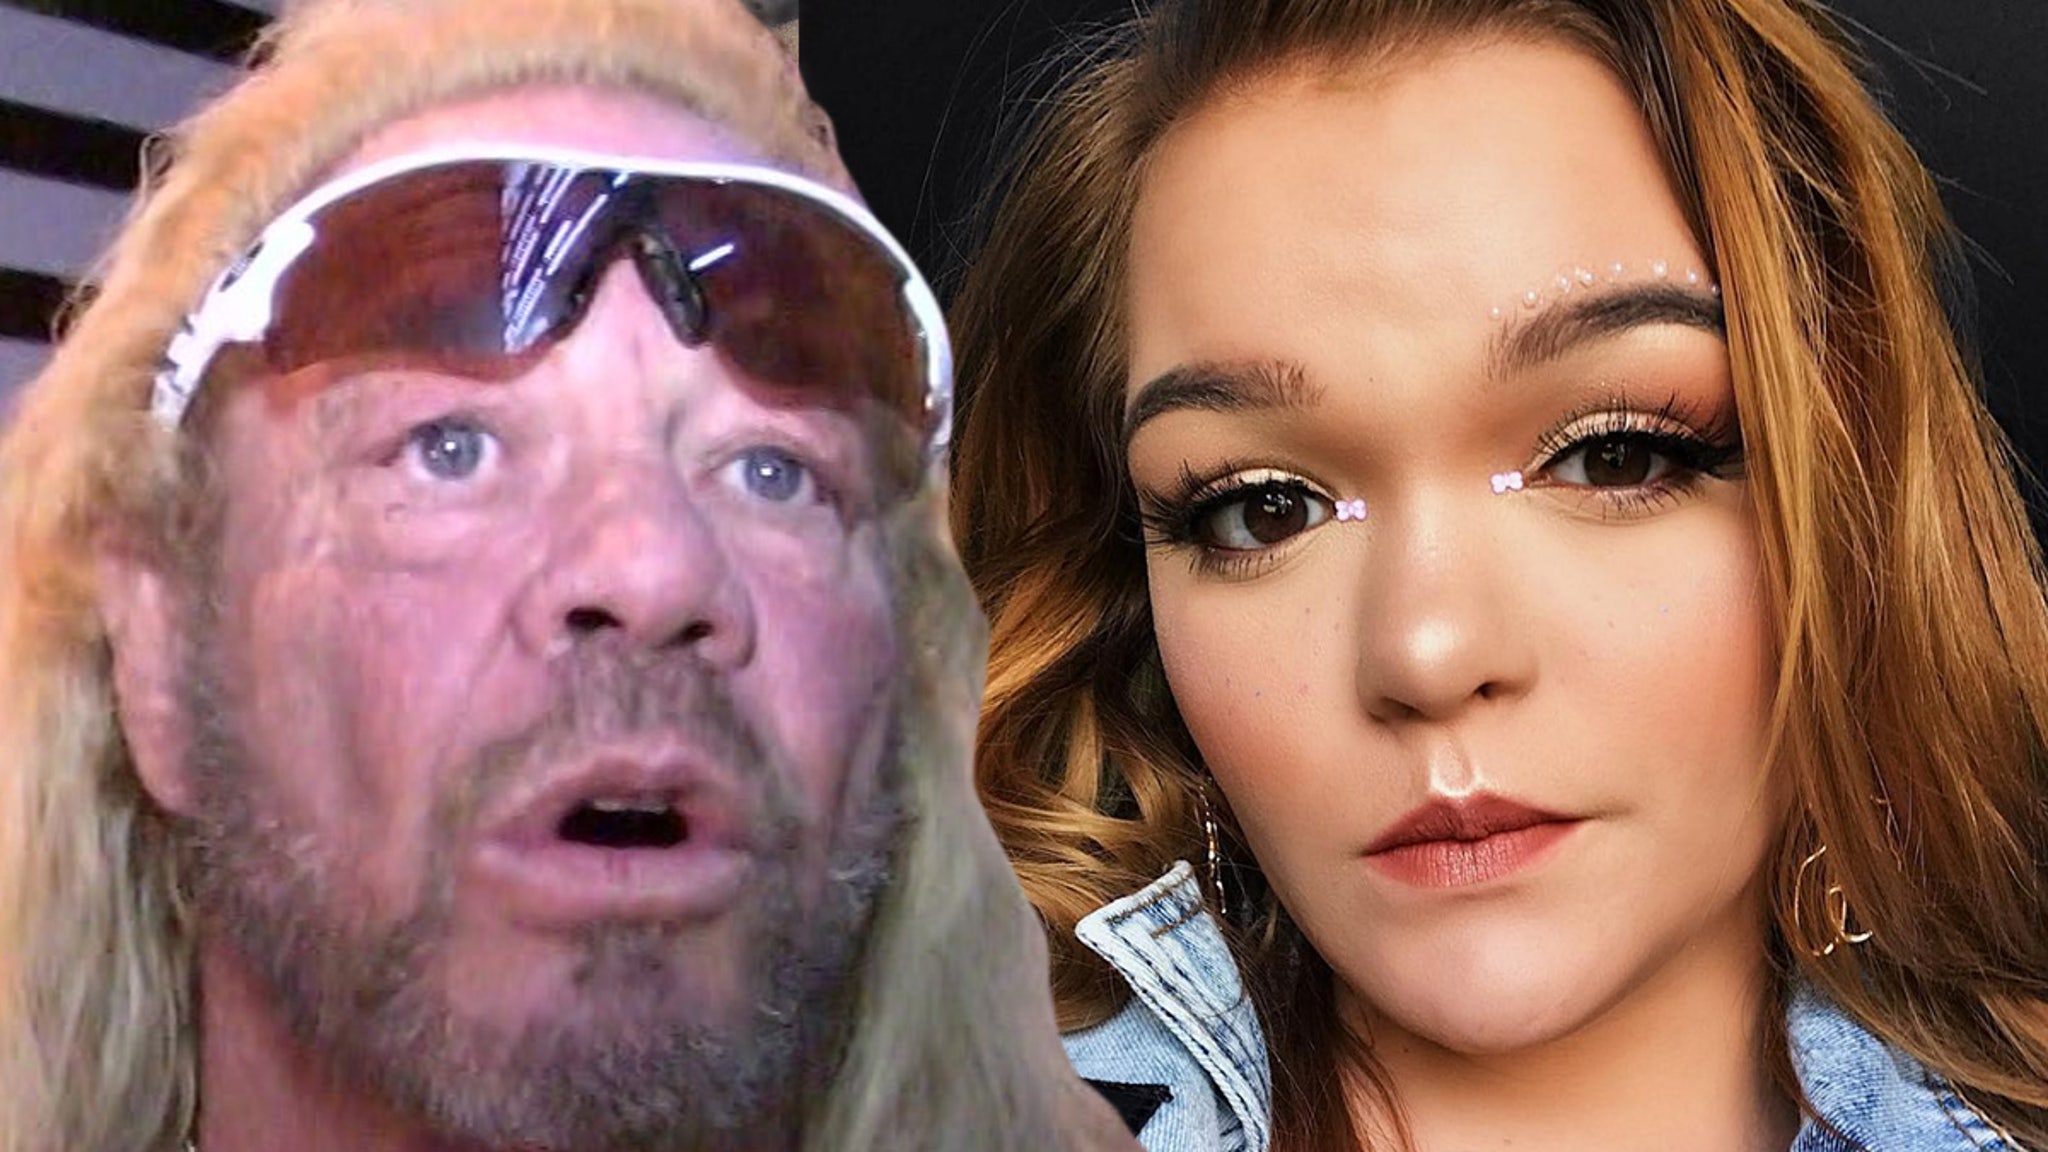 Dog the Bounty Hunter's Daughter Claims Her BLM Support Created Rift - TMZ